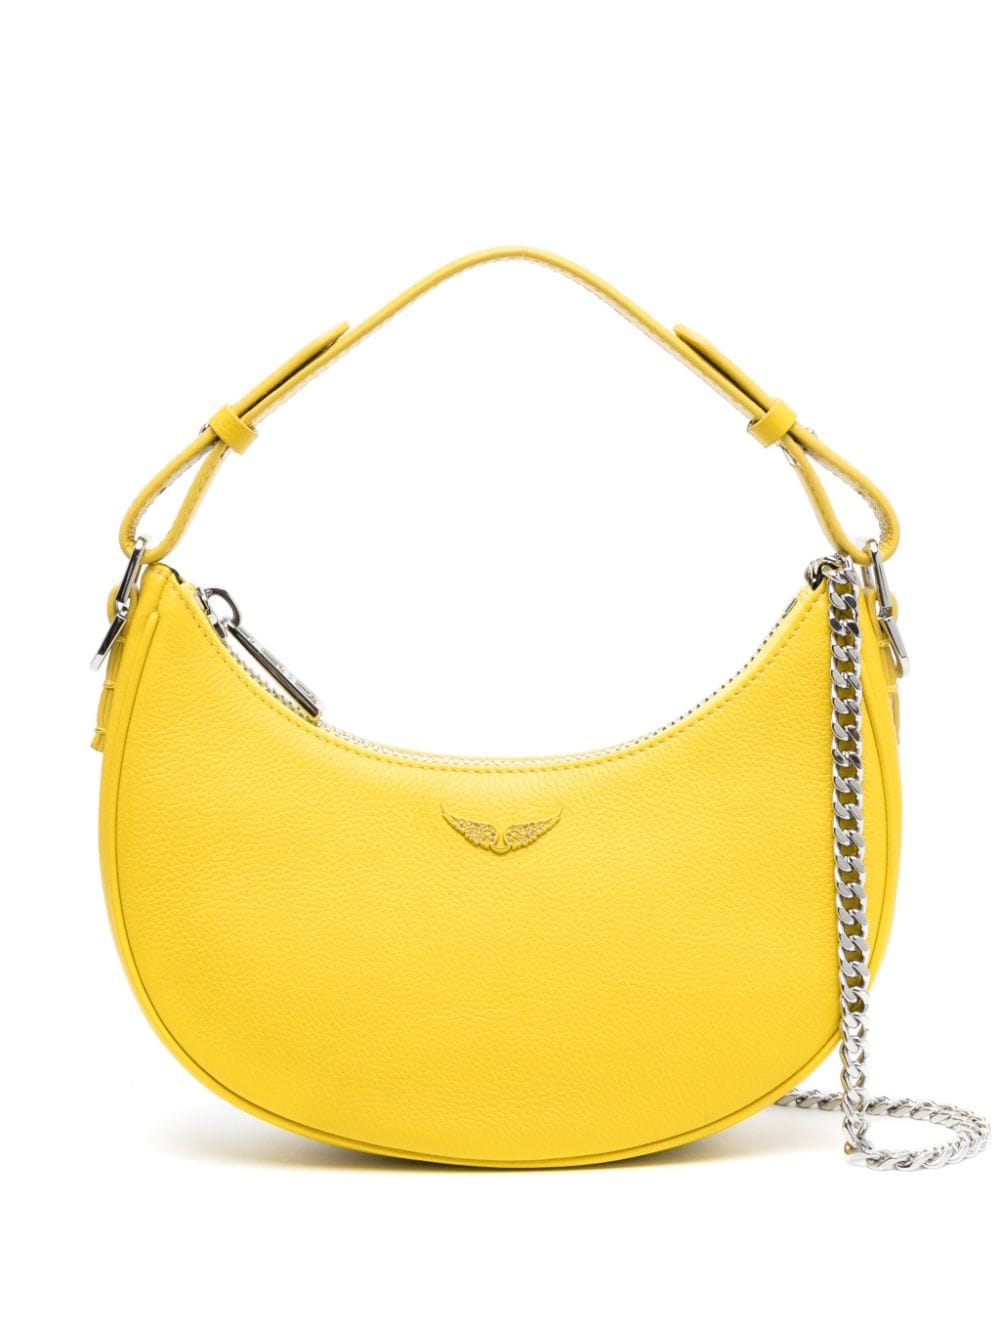 Zadig&Voltaire Moonrock leather tote bag - Yellow